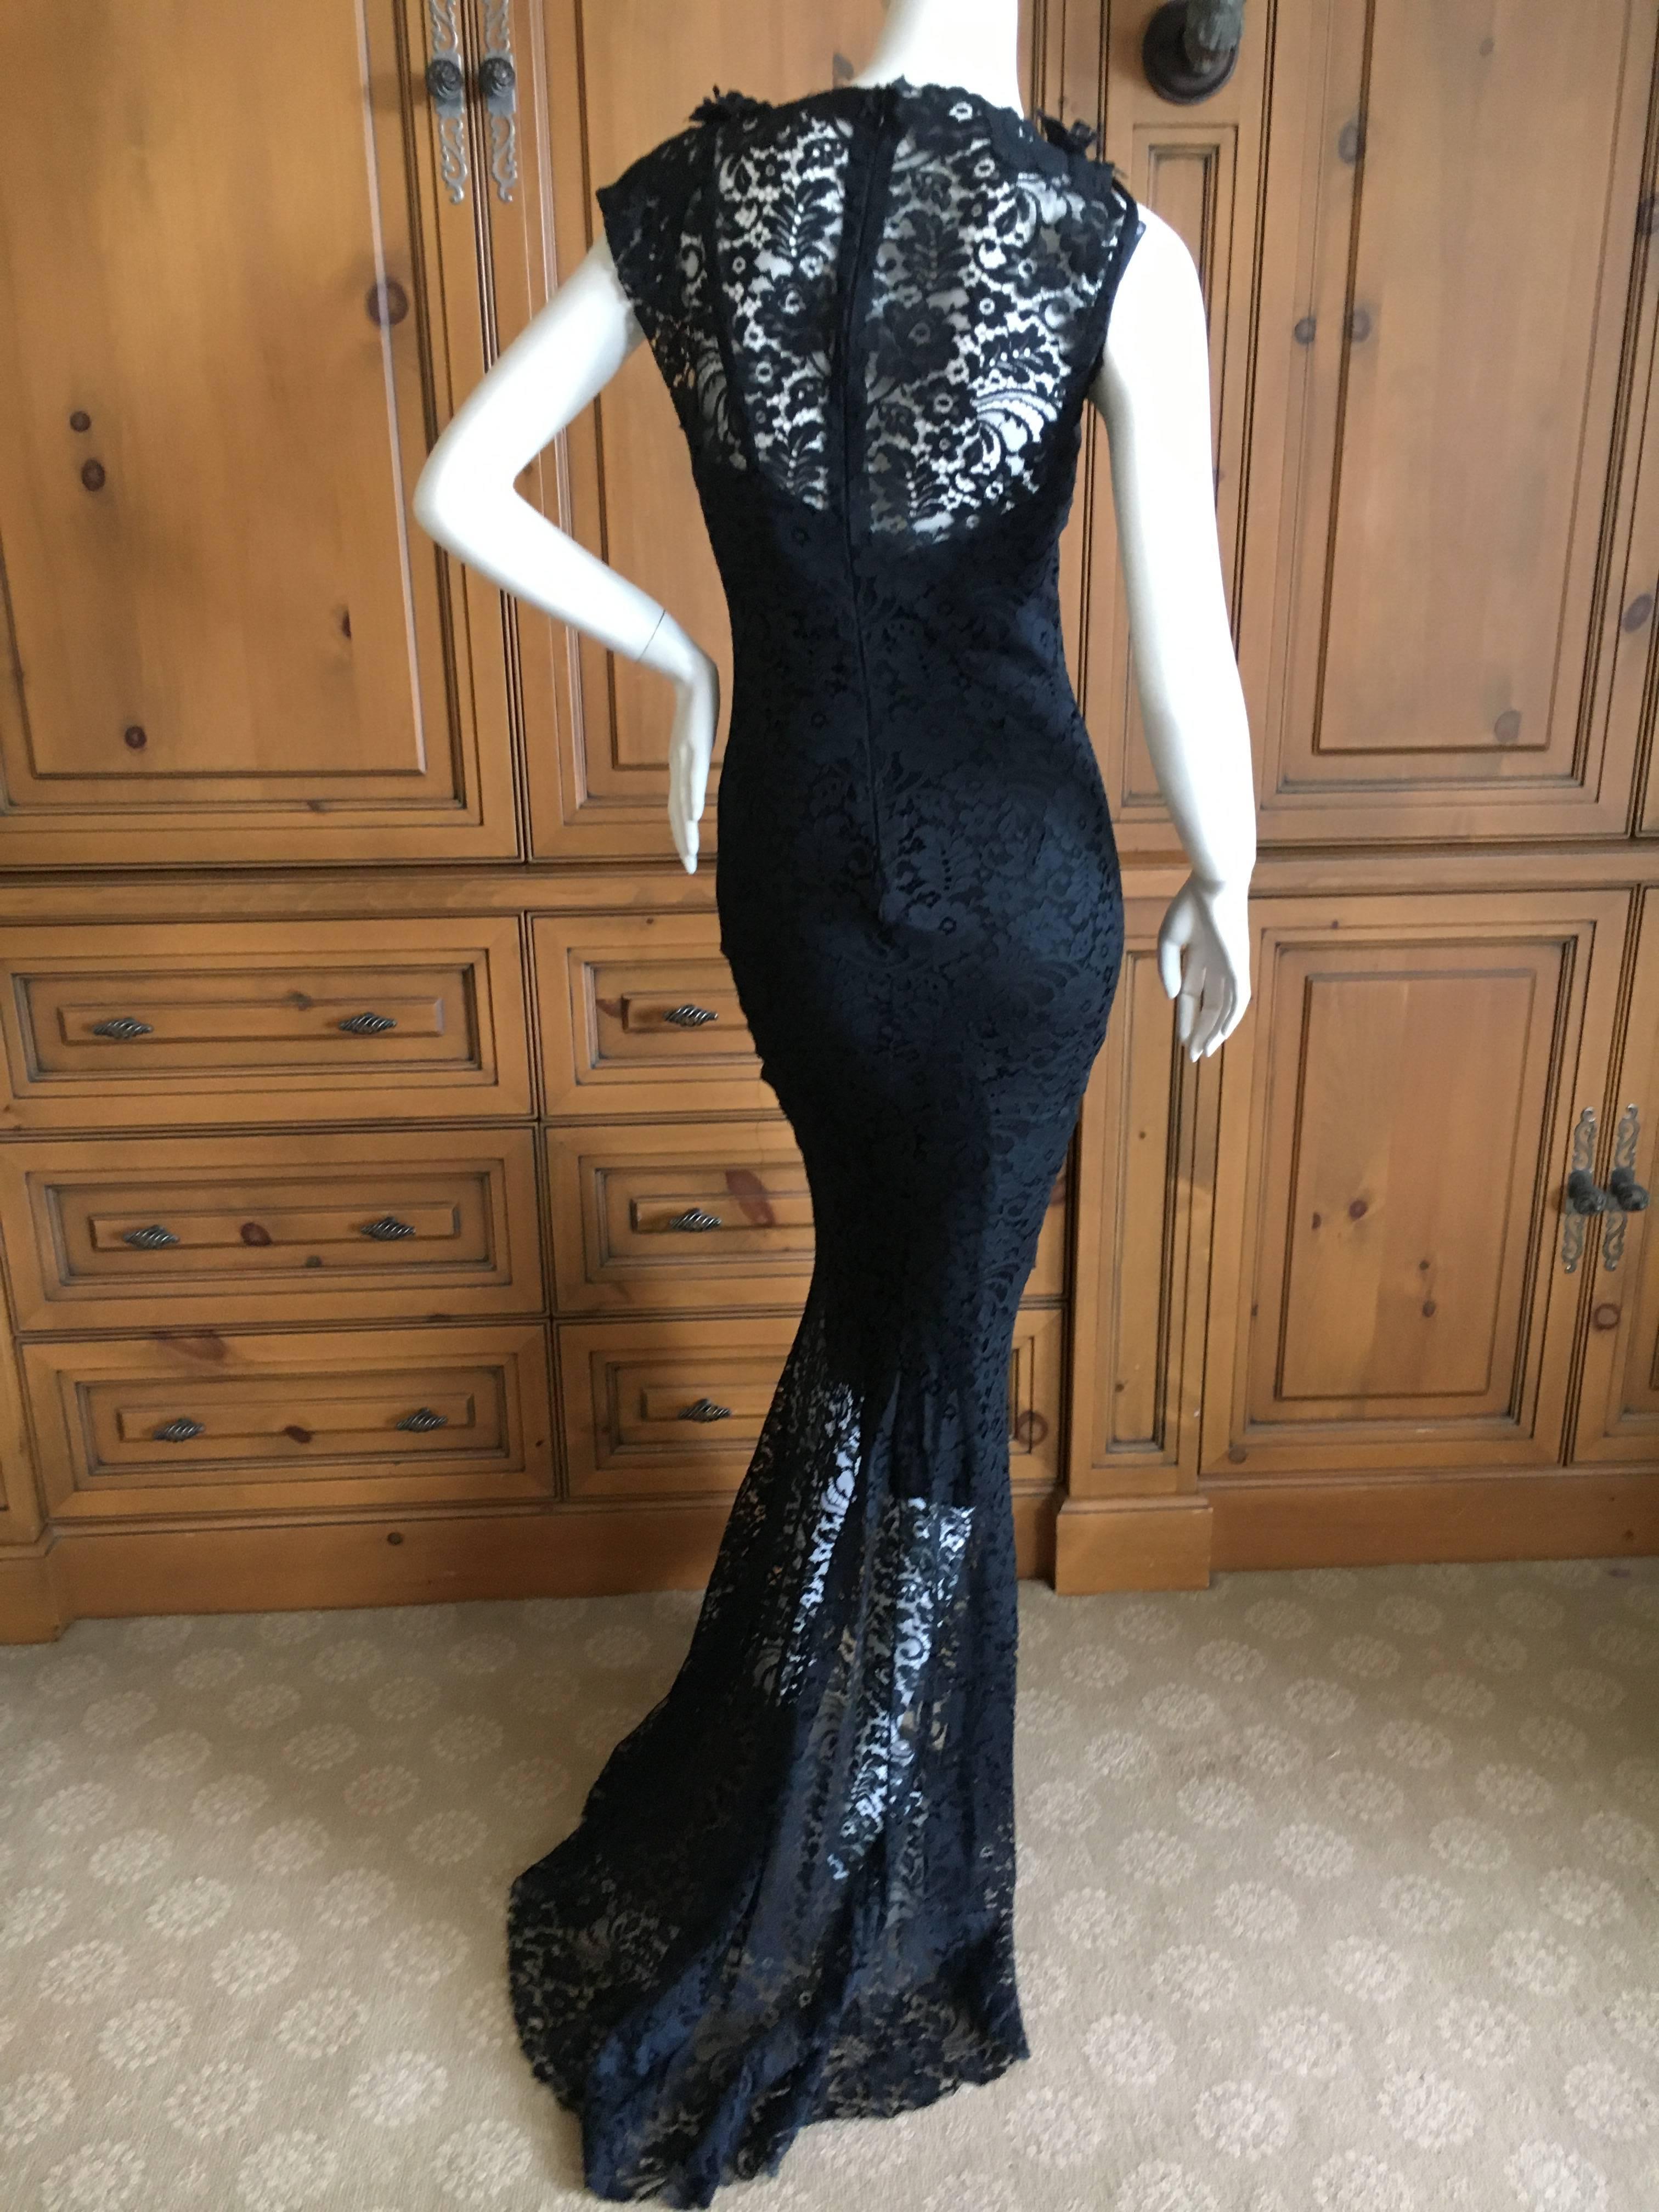 Exquisite lace evening dress by John Galliano for Christian Dior.
Purchased at Bergdorf Goodman in 1998, this has an under slip dress that is also wearable without the over layer. Two dresses in one purchase.
There are floral lace embellishments